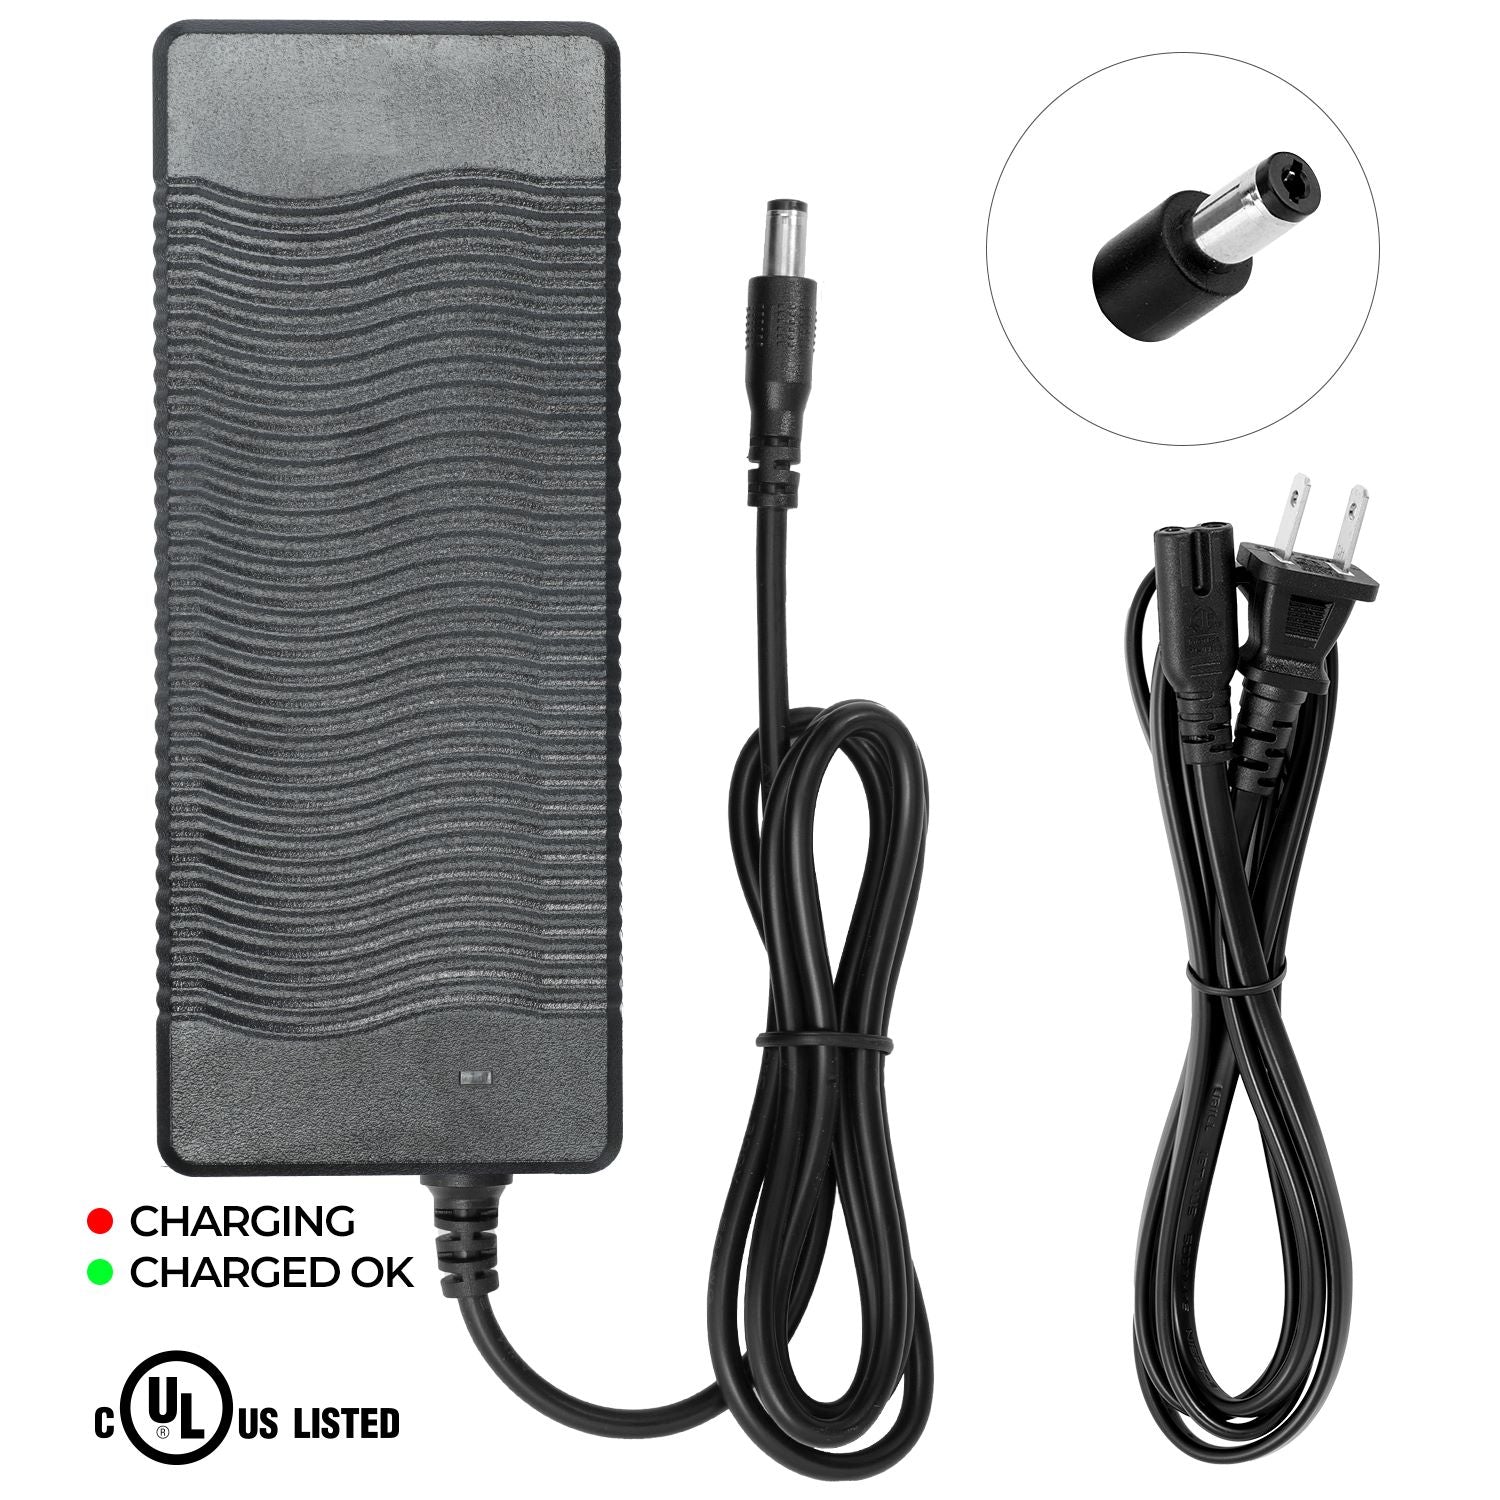 Charger for VoltBike Bravo Electric Bike